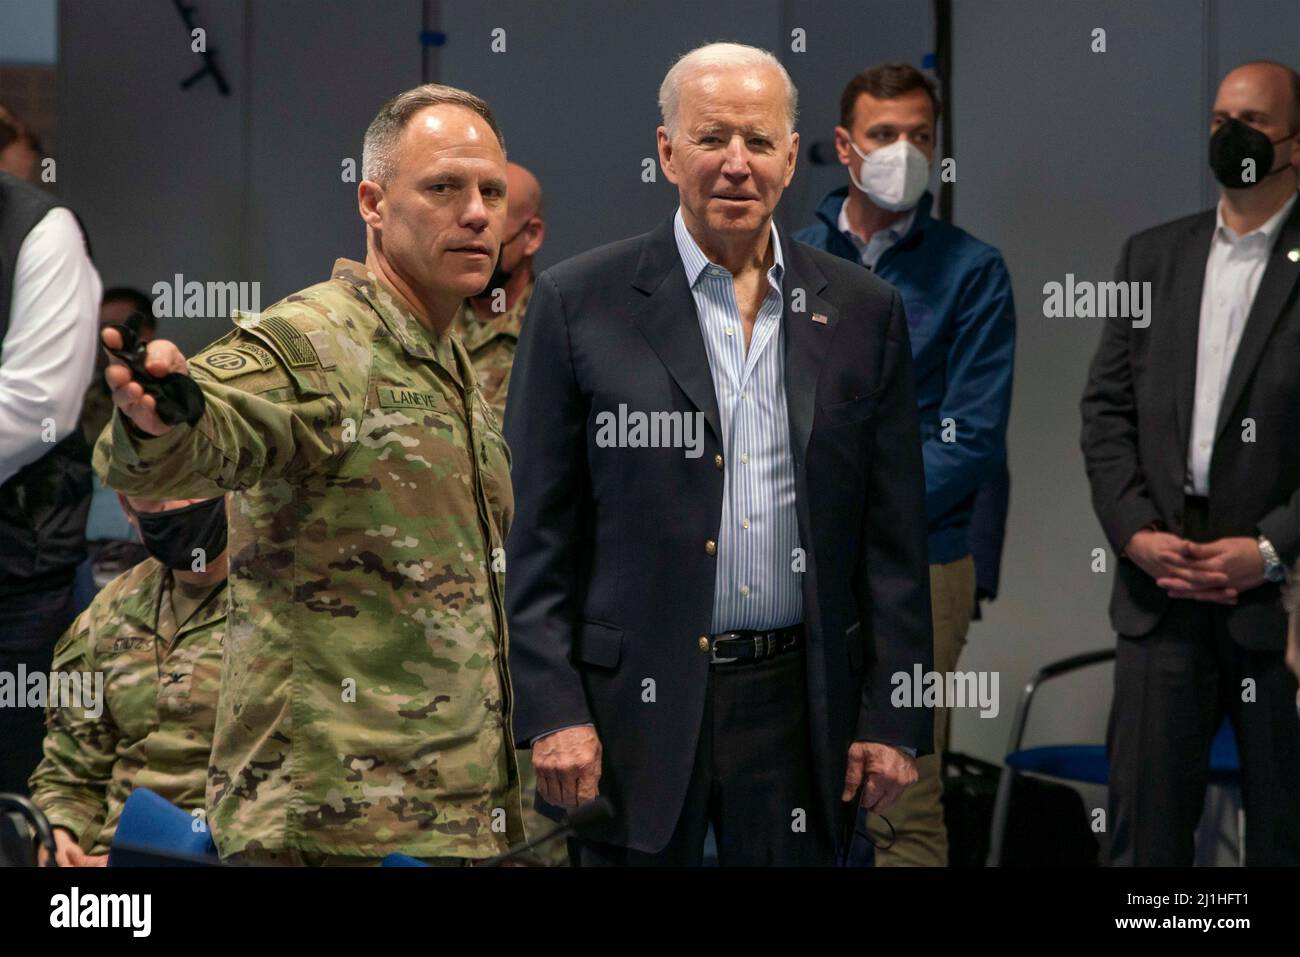 Jasionka, Poland. 25th Mar, 2022. U.S President Joe Biden, is introduced to the troops by Army Maj. Gen. Christopher C. LaNeve, the commanding general of the 82nd Airborne Division, during a visit March 25, 2022 in Jasionka, Poland. Biden visited the 82nd Airborne Division deployed to southeastern Poland in support of NATO. Credit: Sgt. Claudia Nix/U.S. Army/Alamy Live News Stock Photo